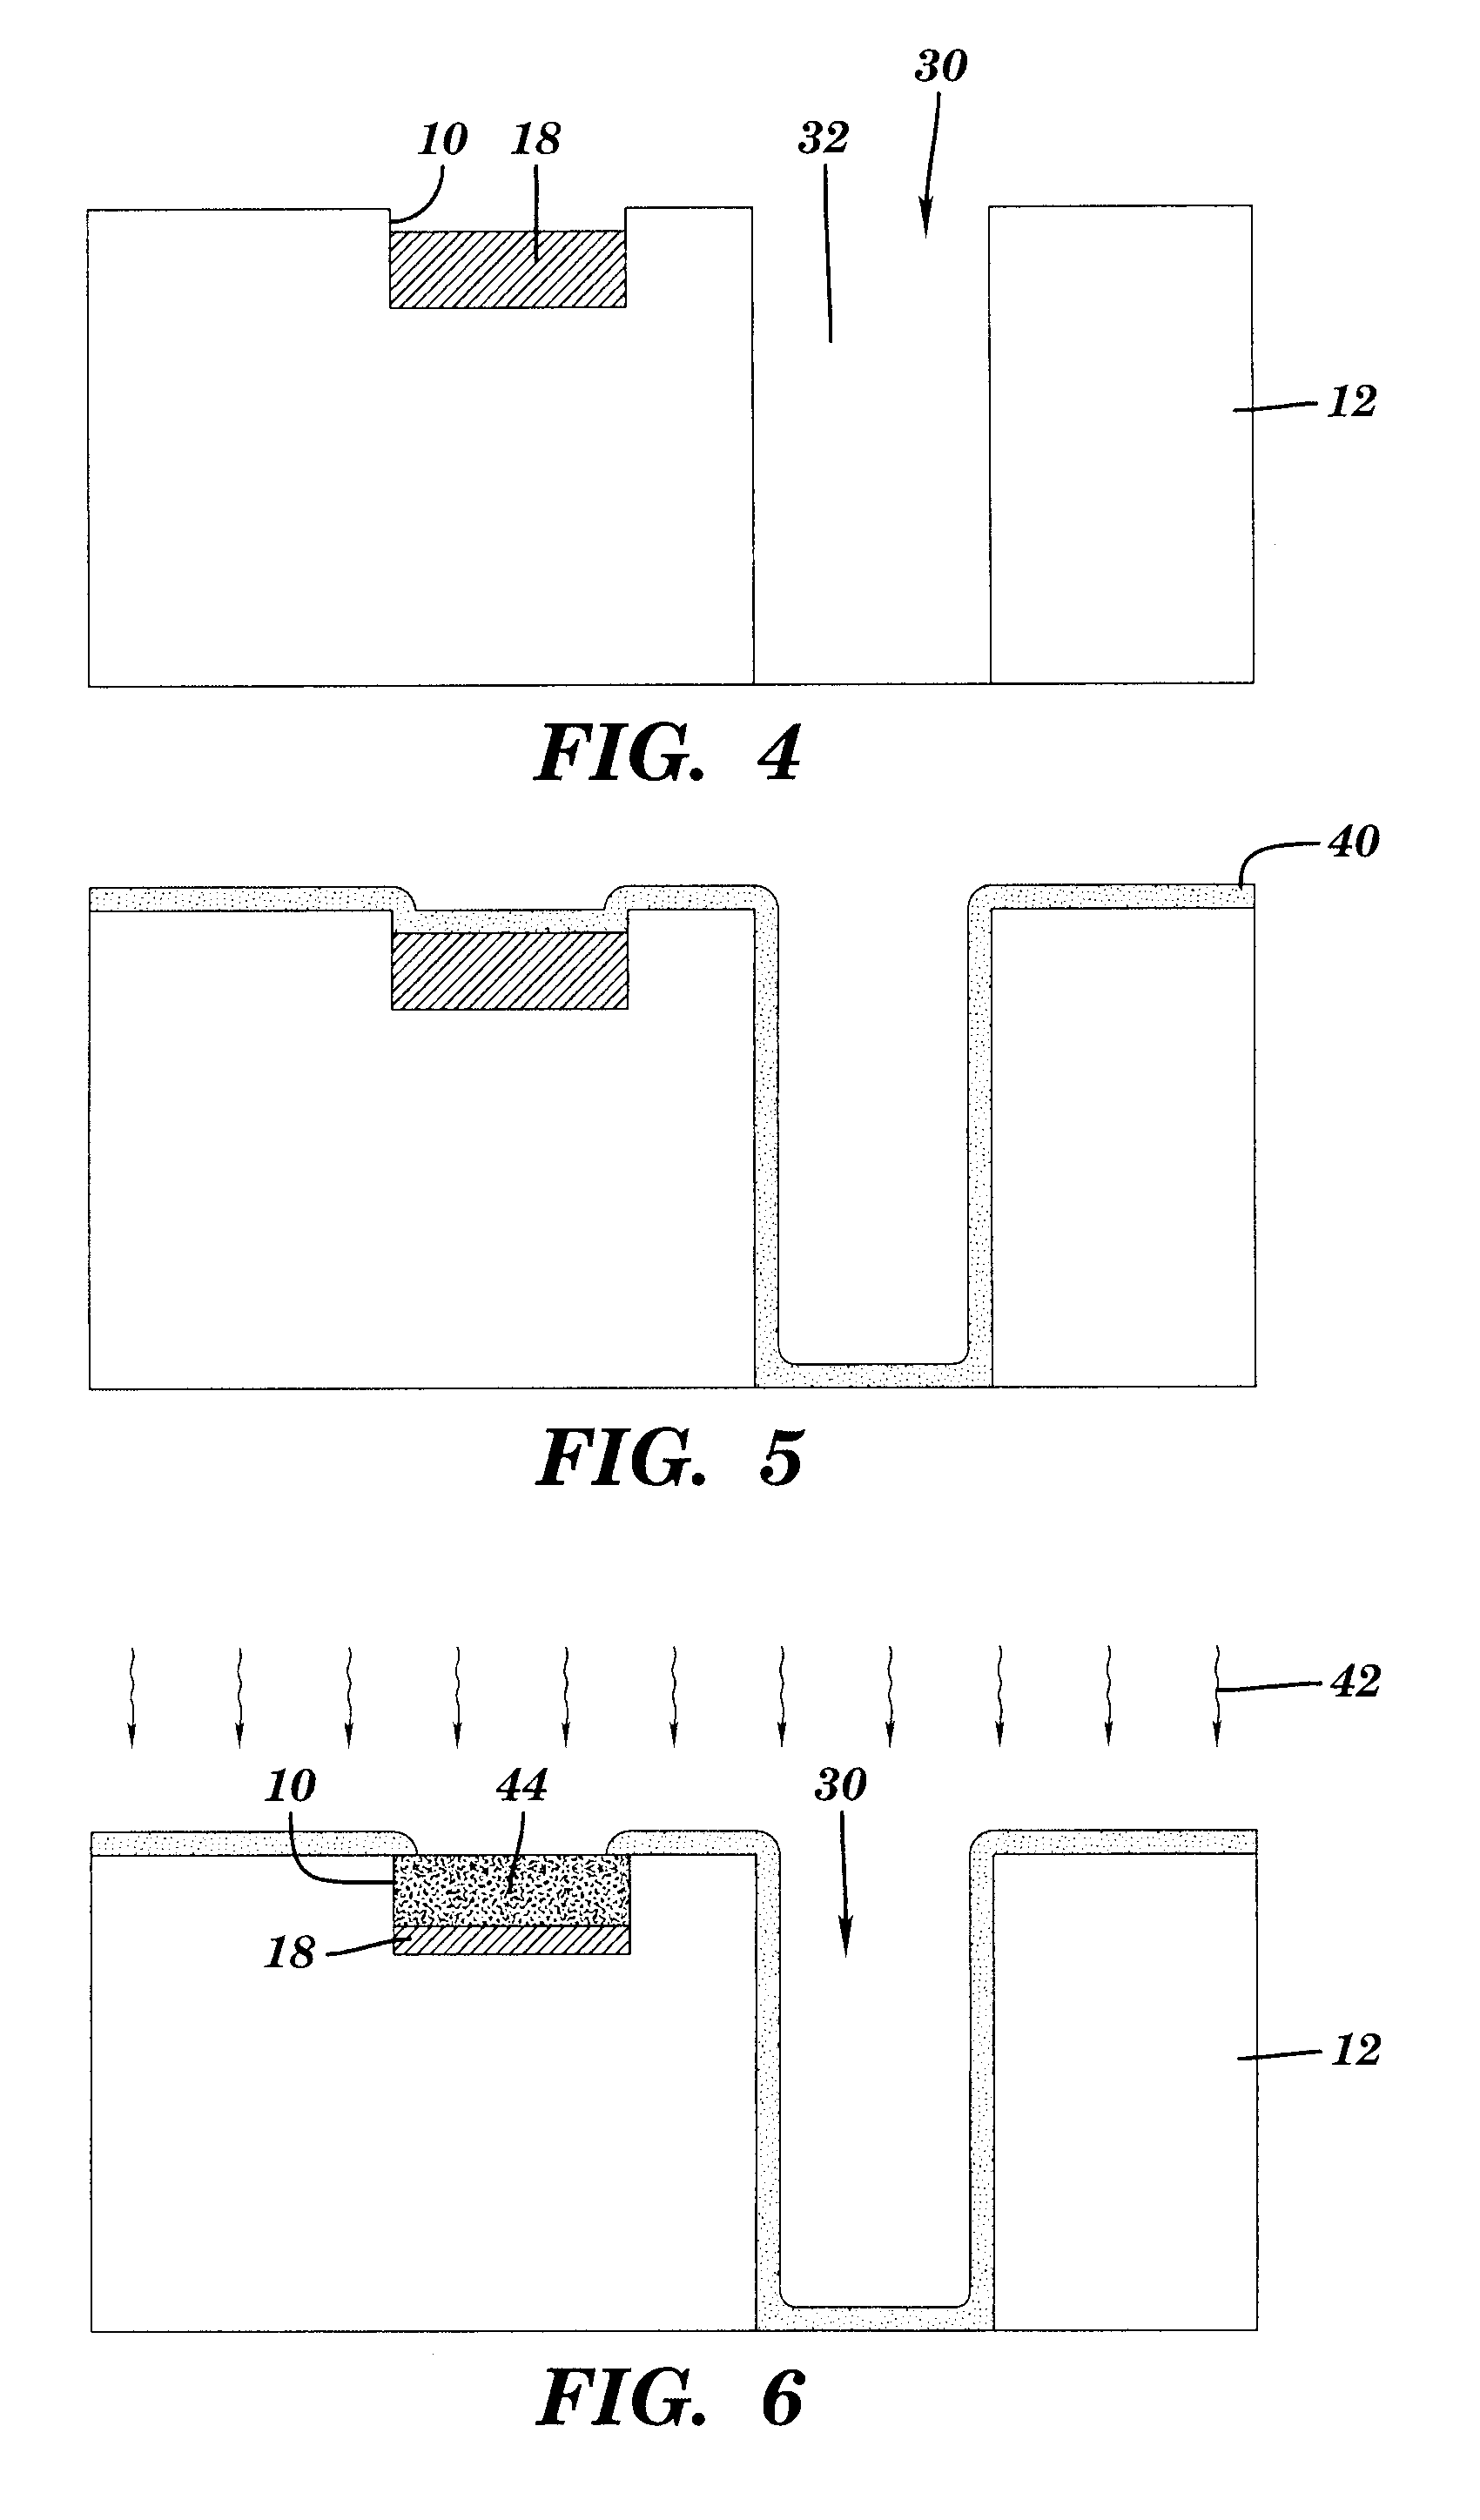 Silicide resistor in BEOL layer of semiconductor device and method